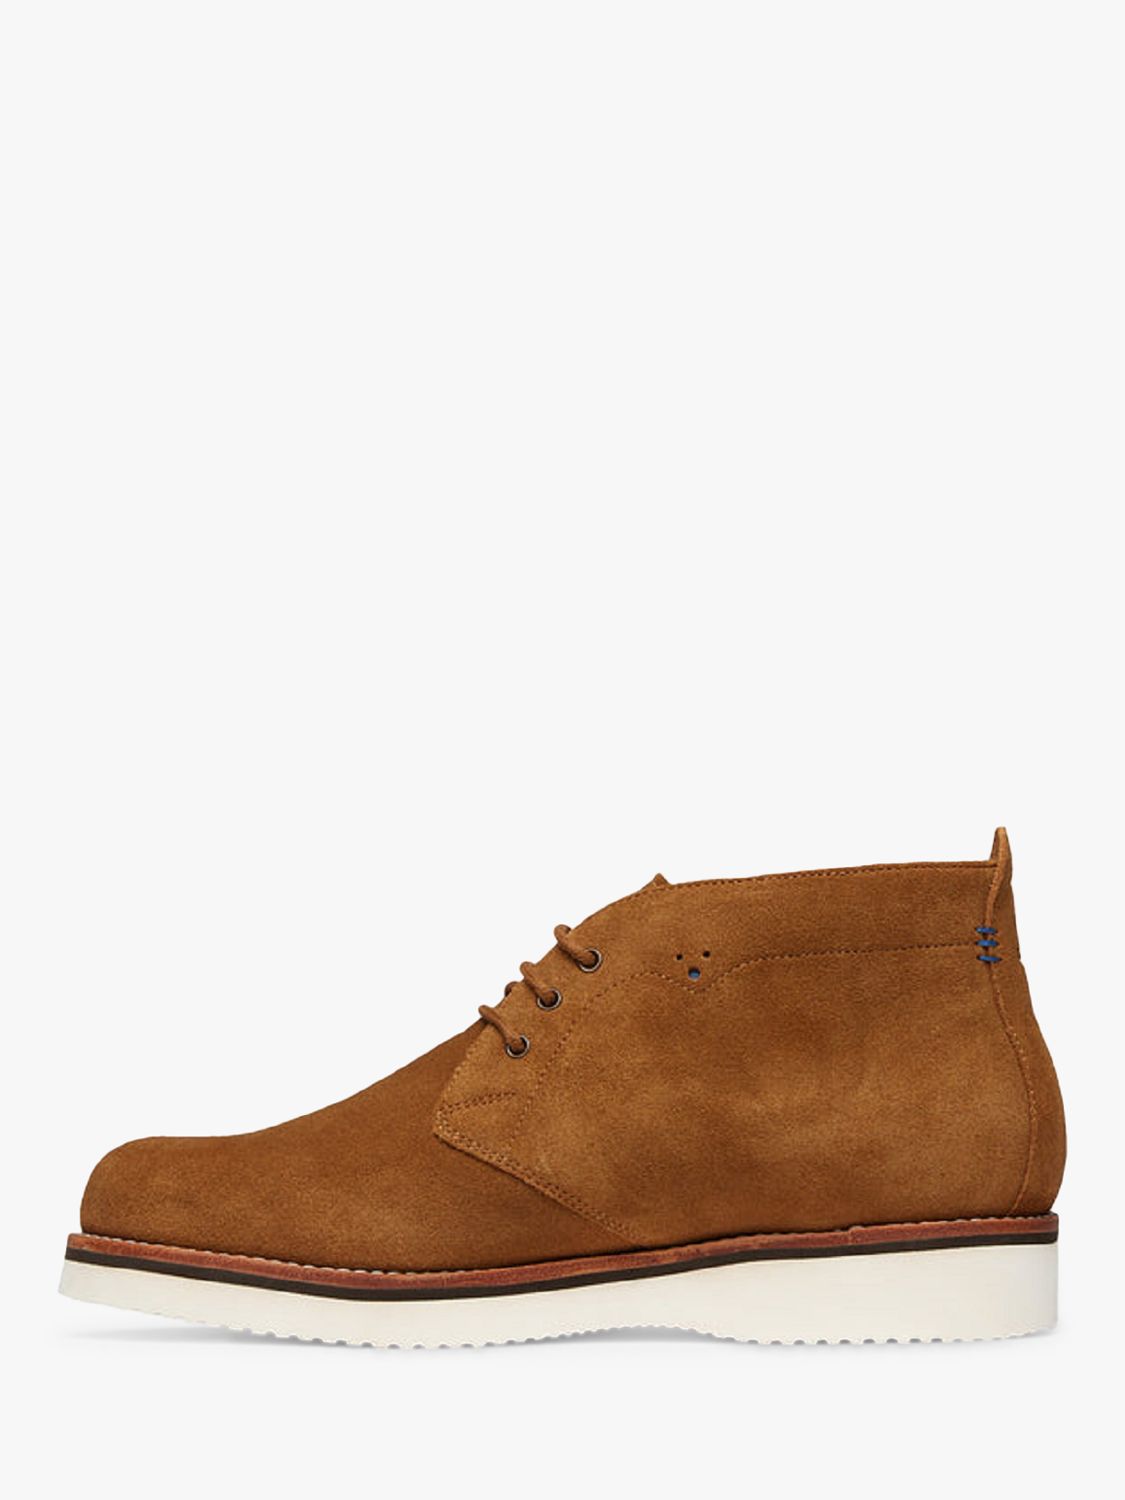 Oliver Sweeney Jurby Suede Chukka Boots